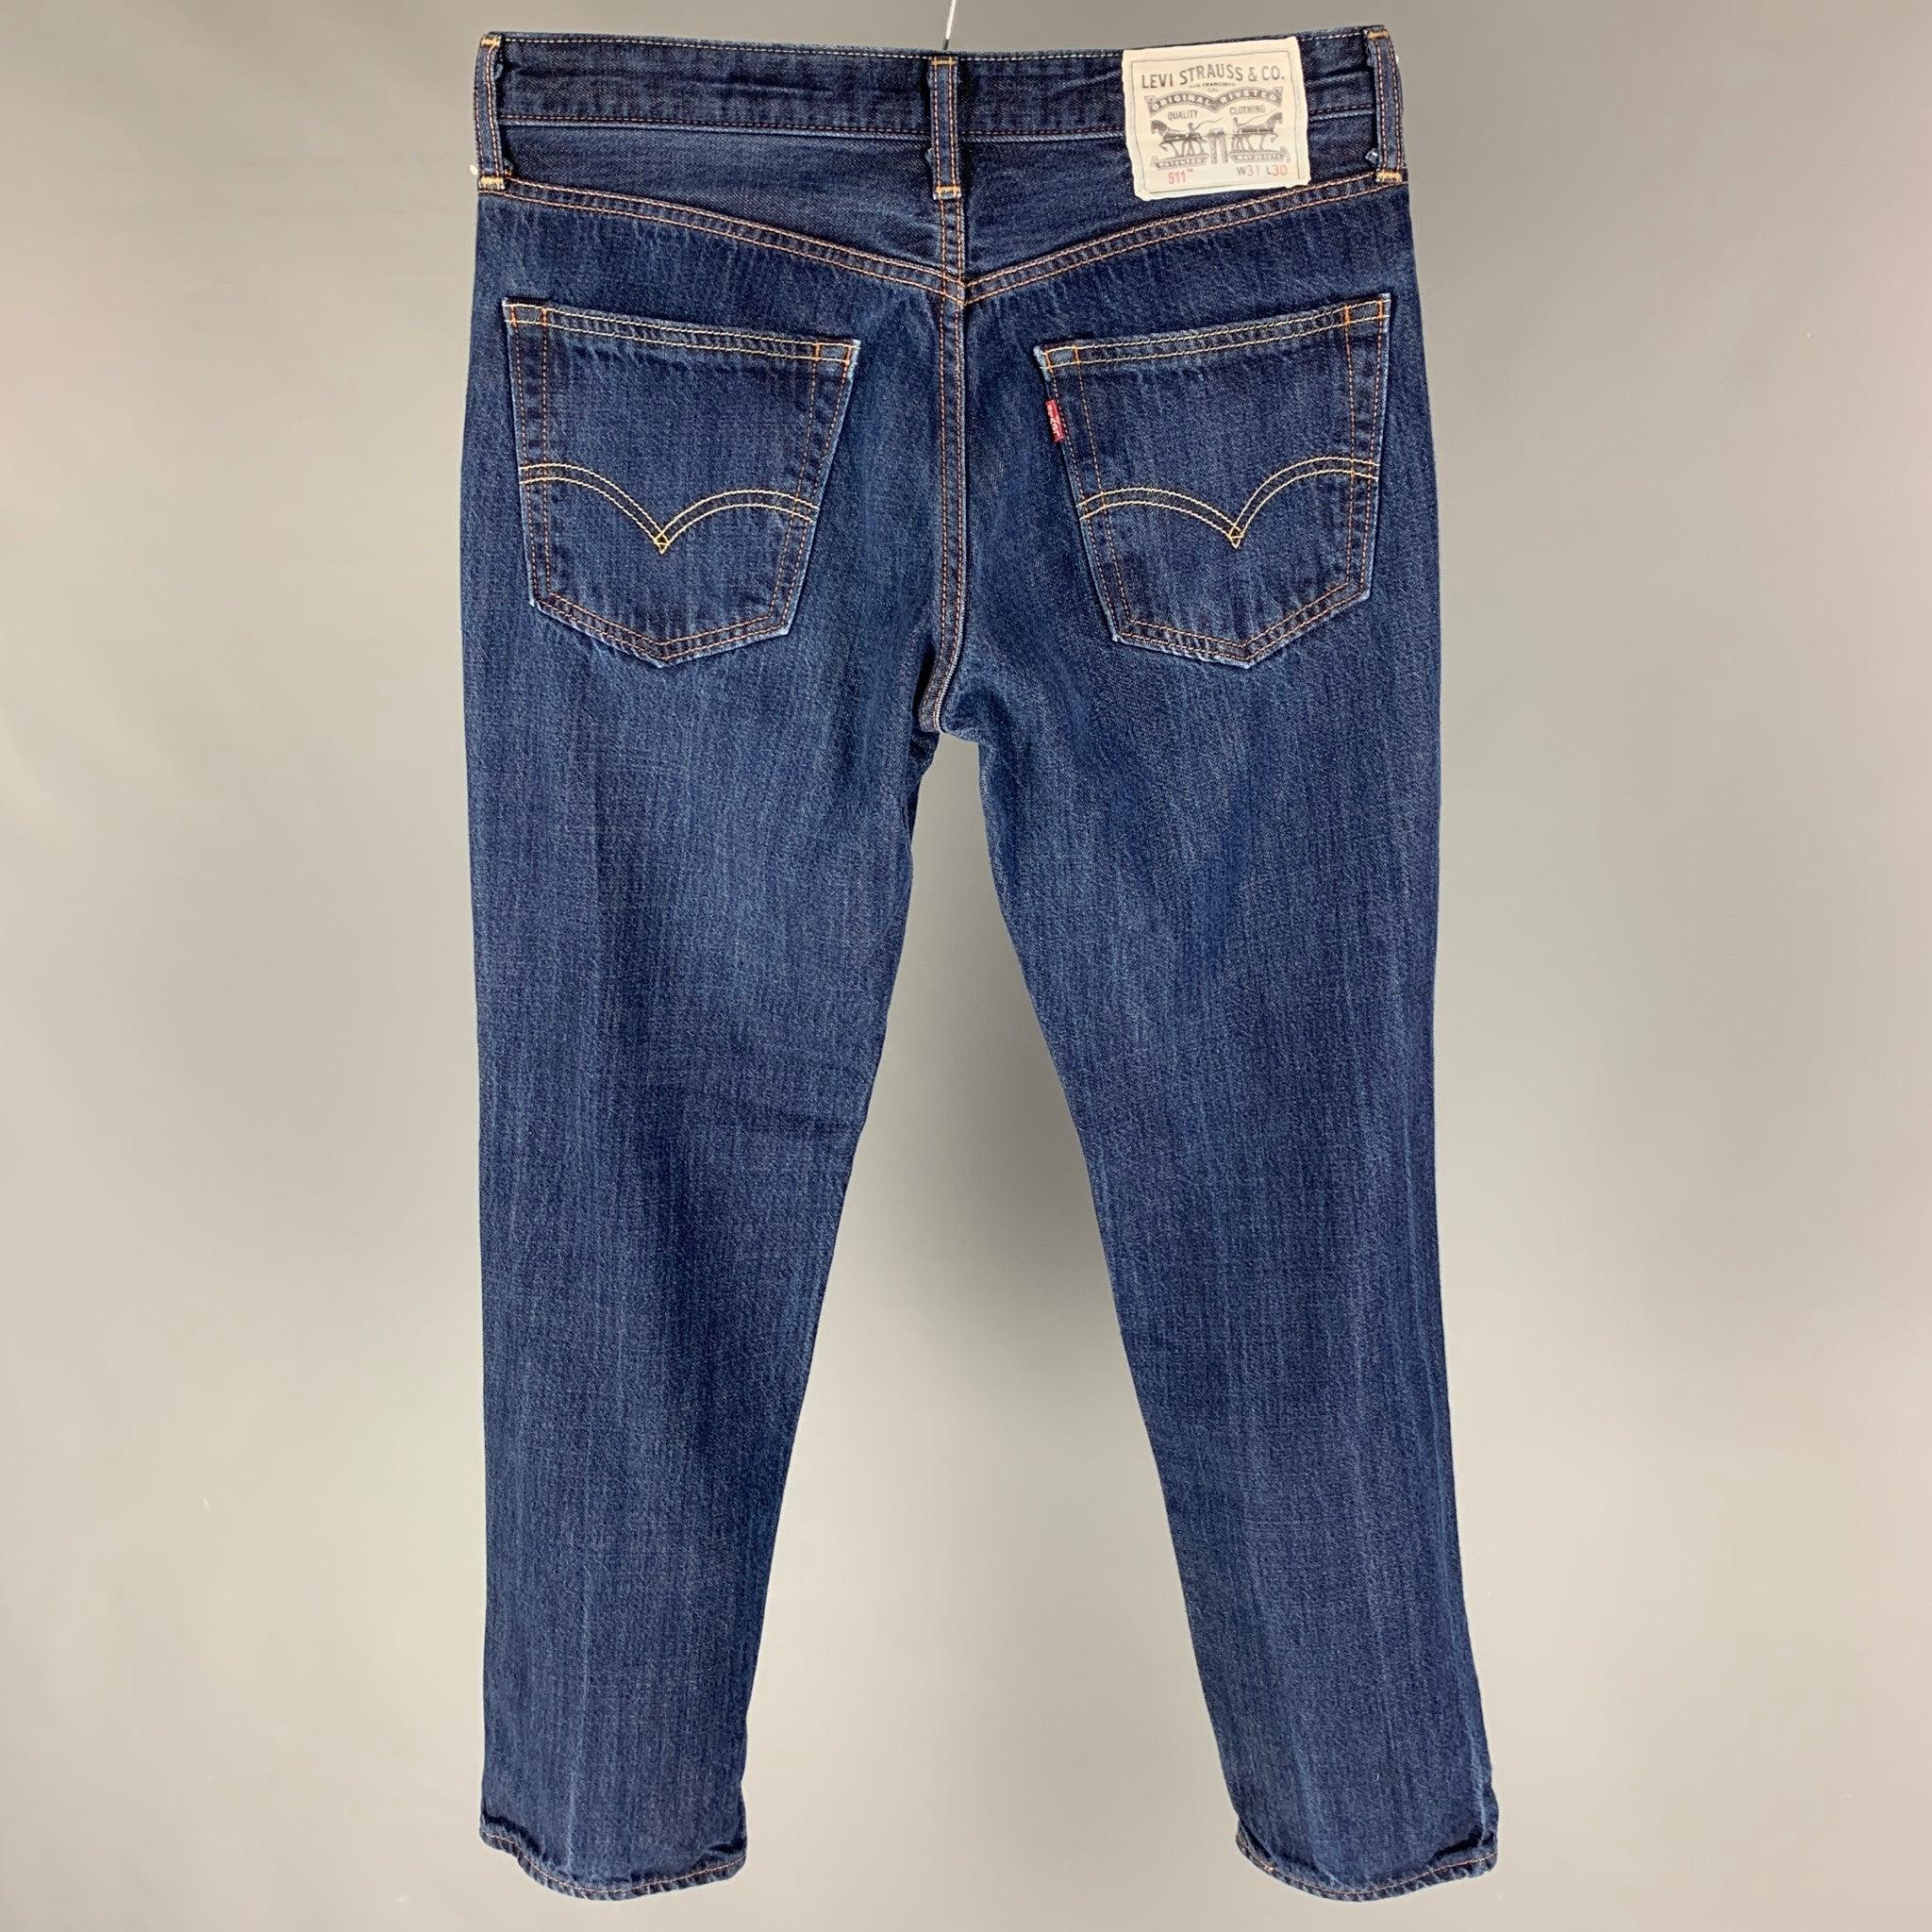 LEVIS x OUTERKNOWN jeans comes in a indigo cotton / lyocell featuring a slim fit, contrast stitching, and a zip fly closure.
Very Good
Pre-Owned Condition. 

Marked:   31x30 

Measurements: 
  Waist: 30 inches  Rise: 10 inches  Inseam: 29 inches 
 